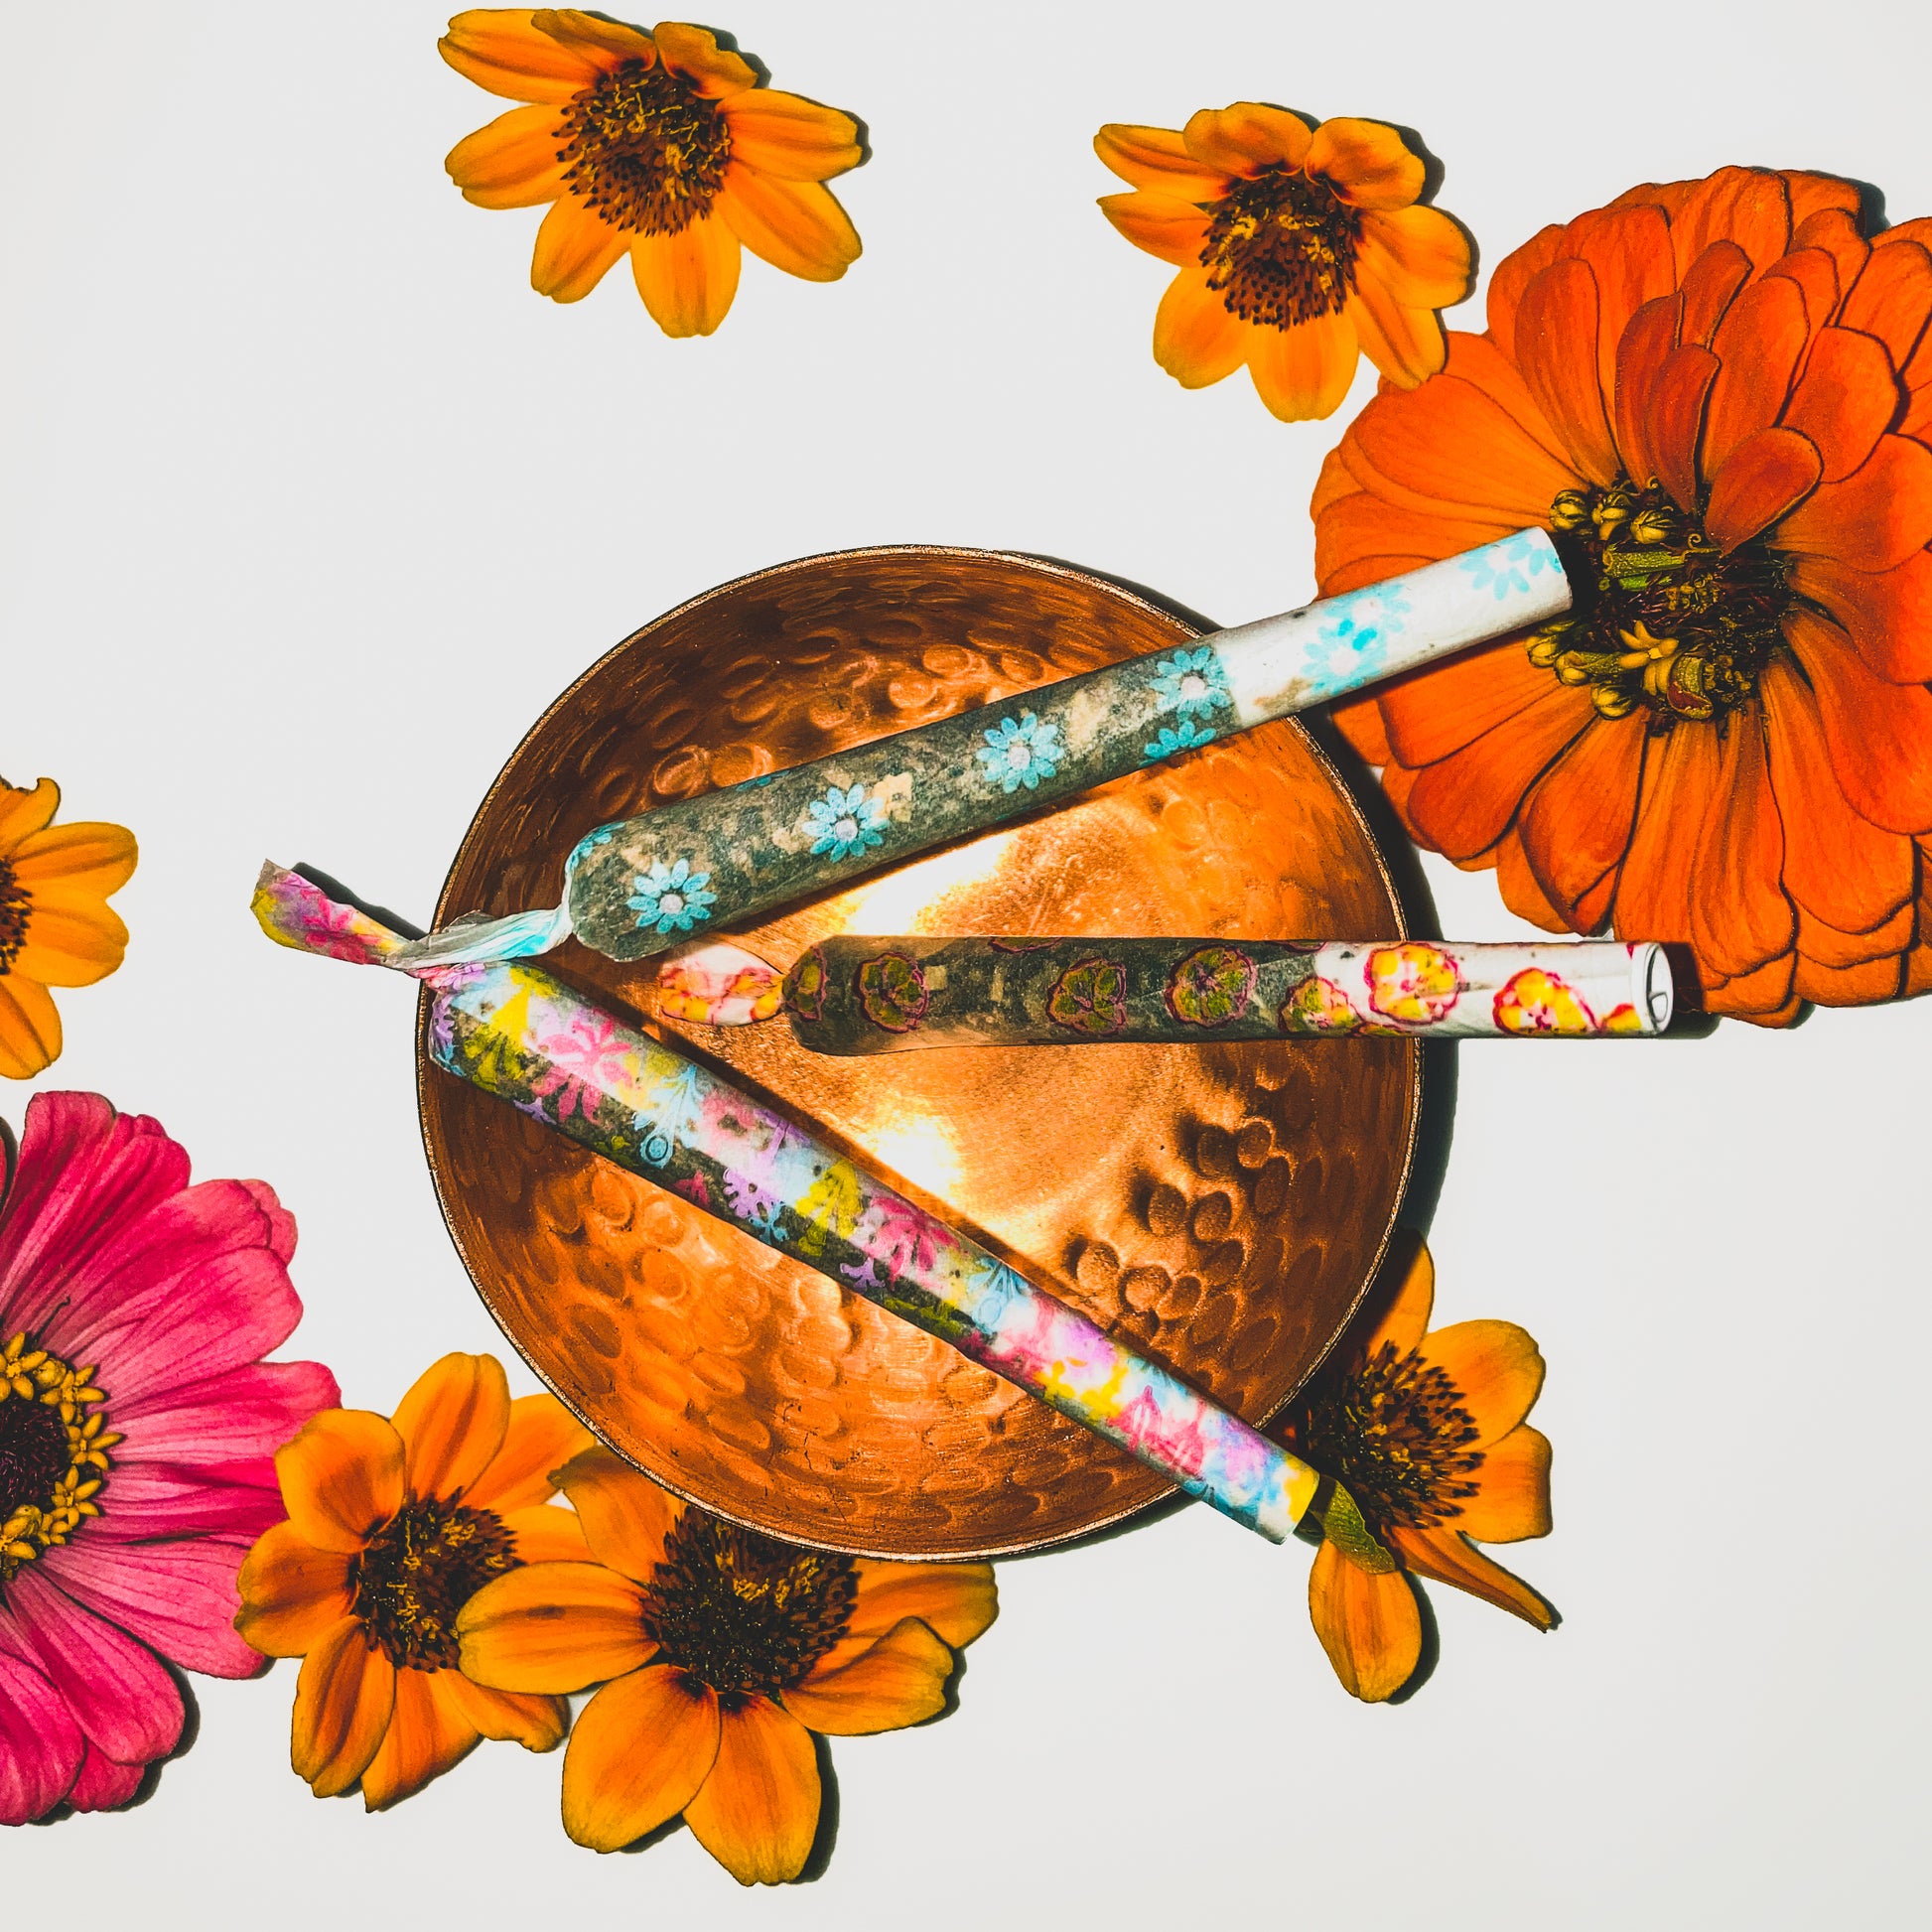 Set of three floral printed rolling papers. These designer rolling papers are girly, pretty, vegan, cute, cool, standard size, high quality, even burn, natural dyes, best tasting, slow burn.